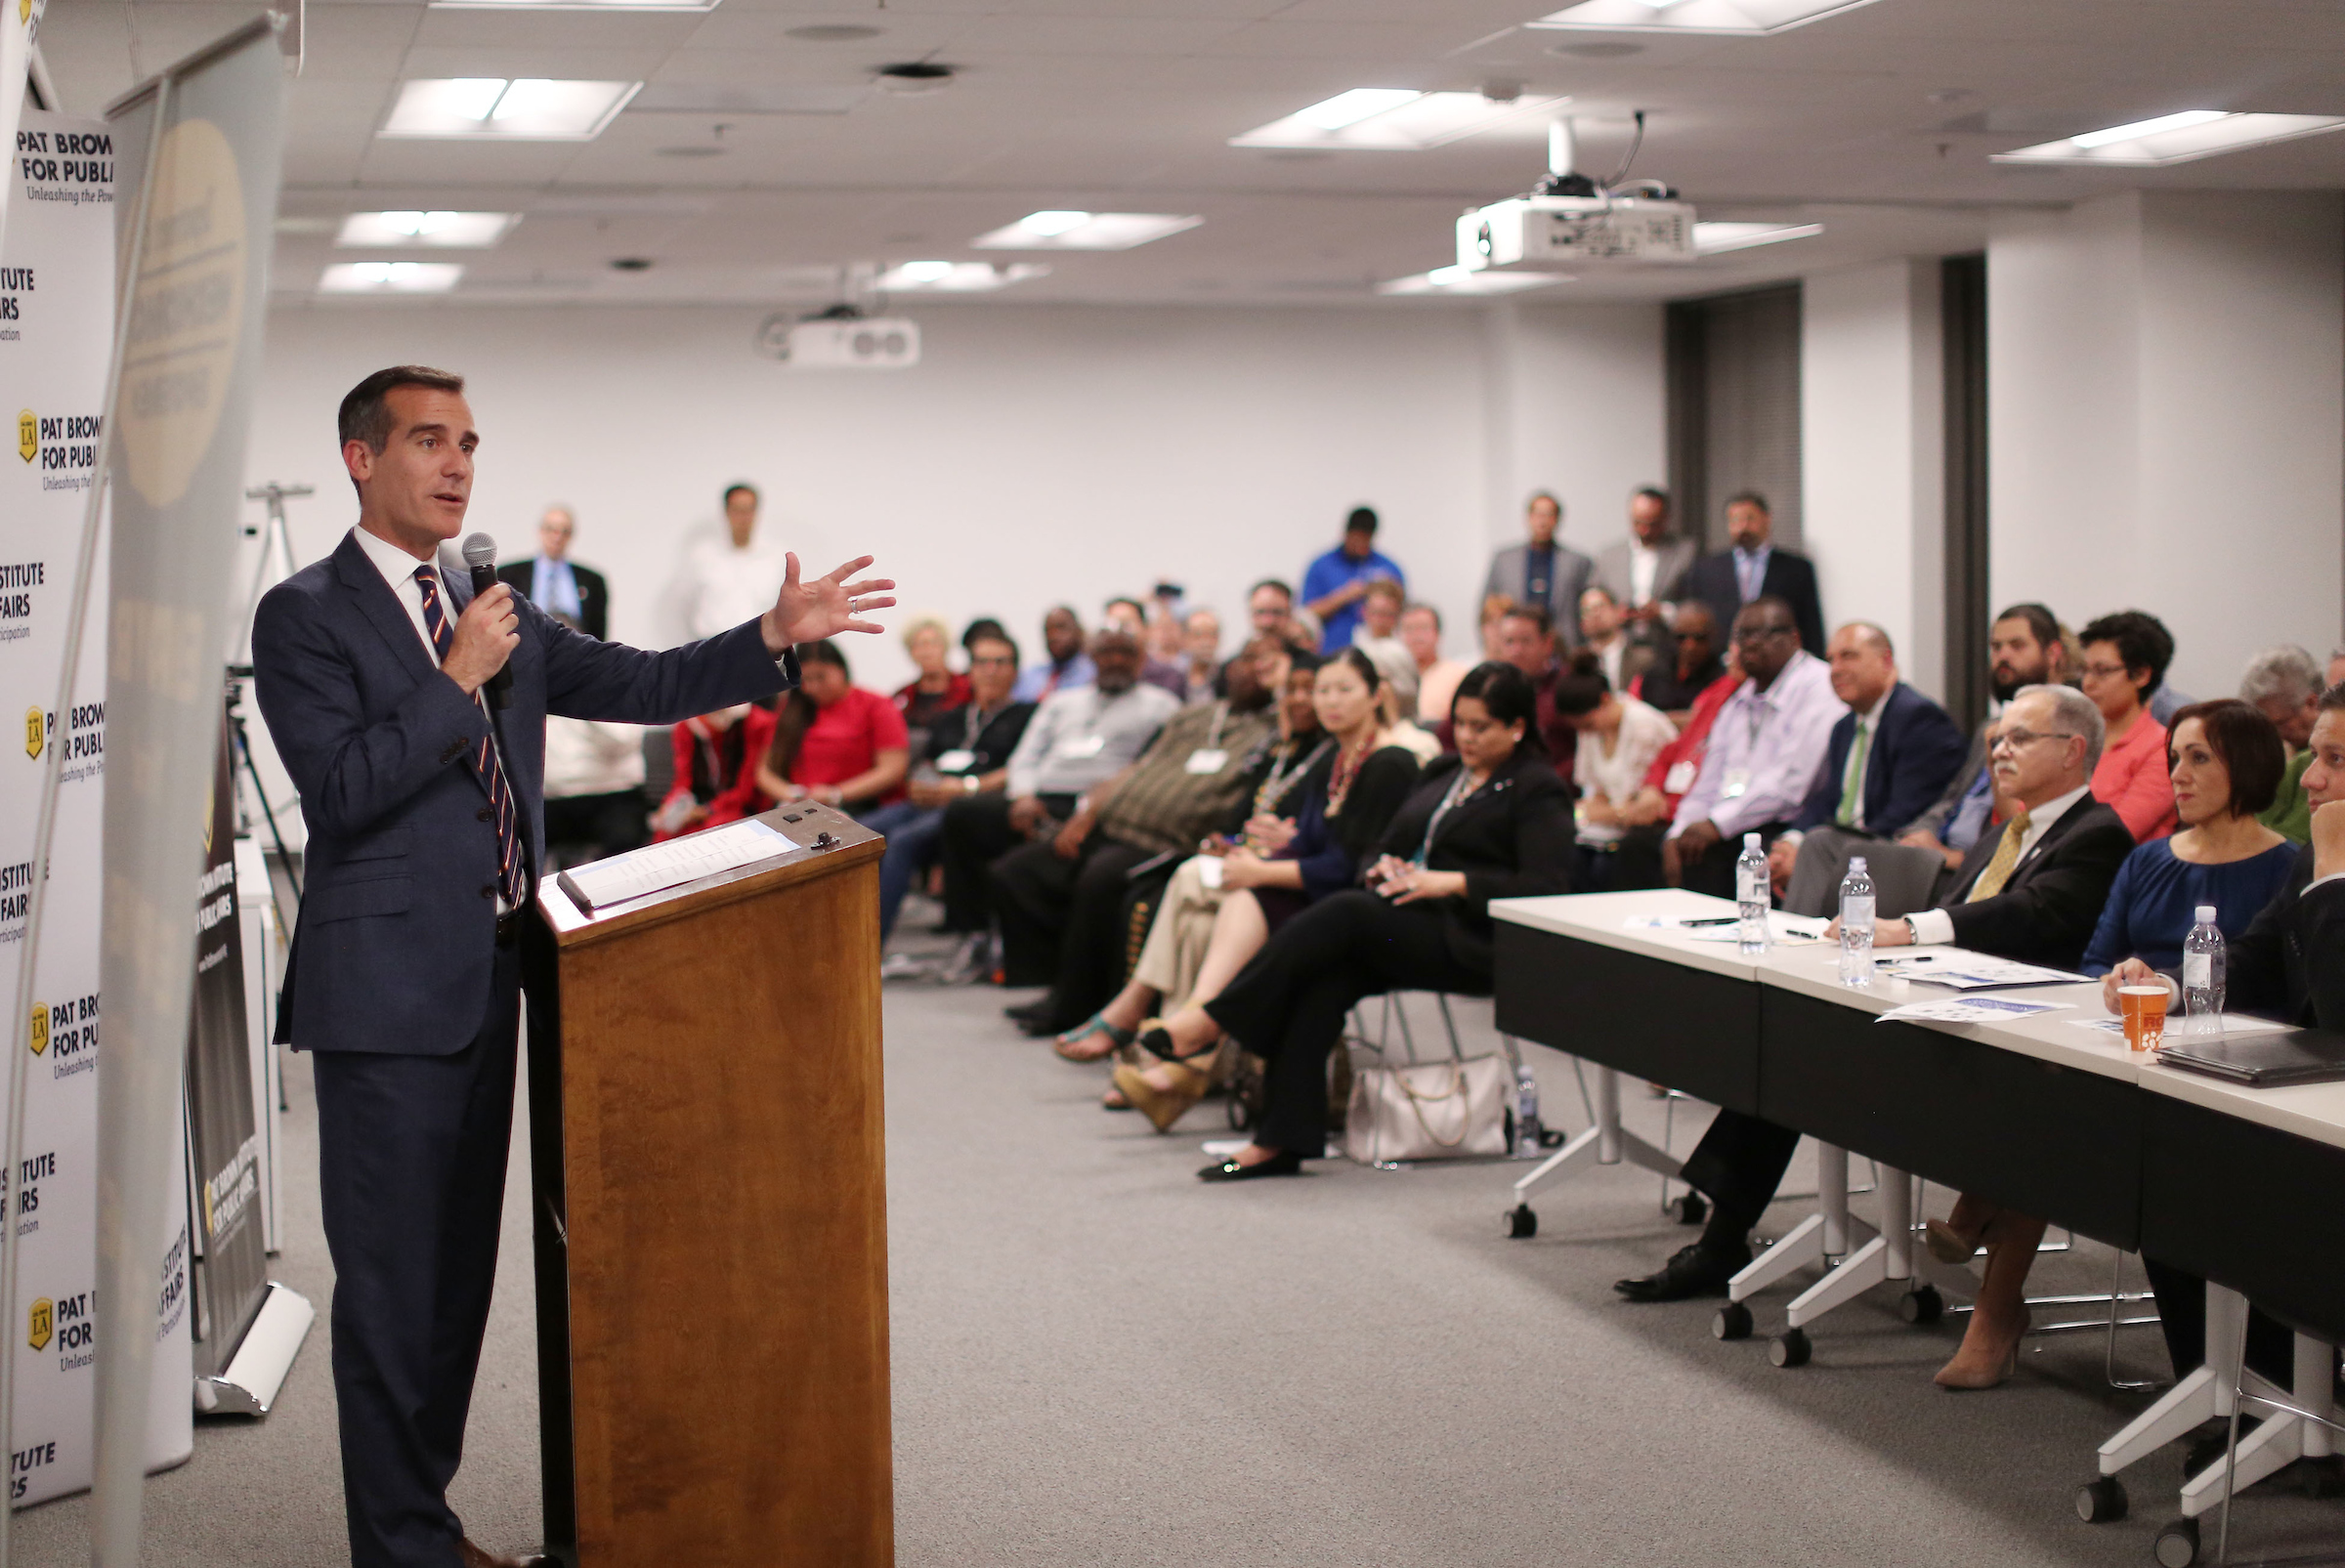 Mayor Eric Garcetti speaks with a microphone to a room full of participants of Civic University, a program organized by the Pat Brown Institute for Public Affairs at Cal State LA.